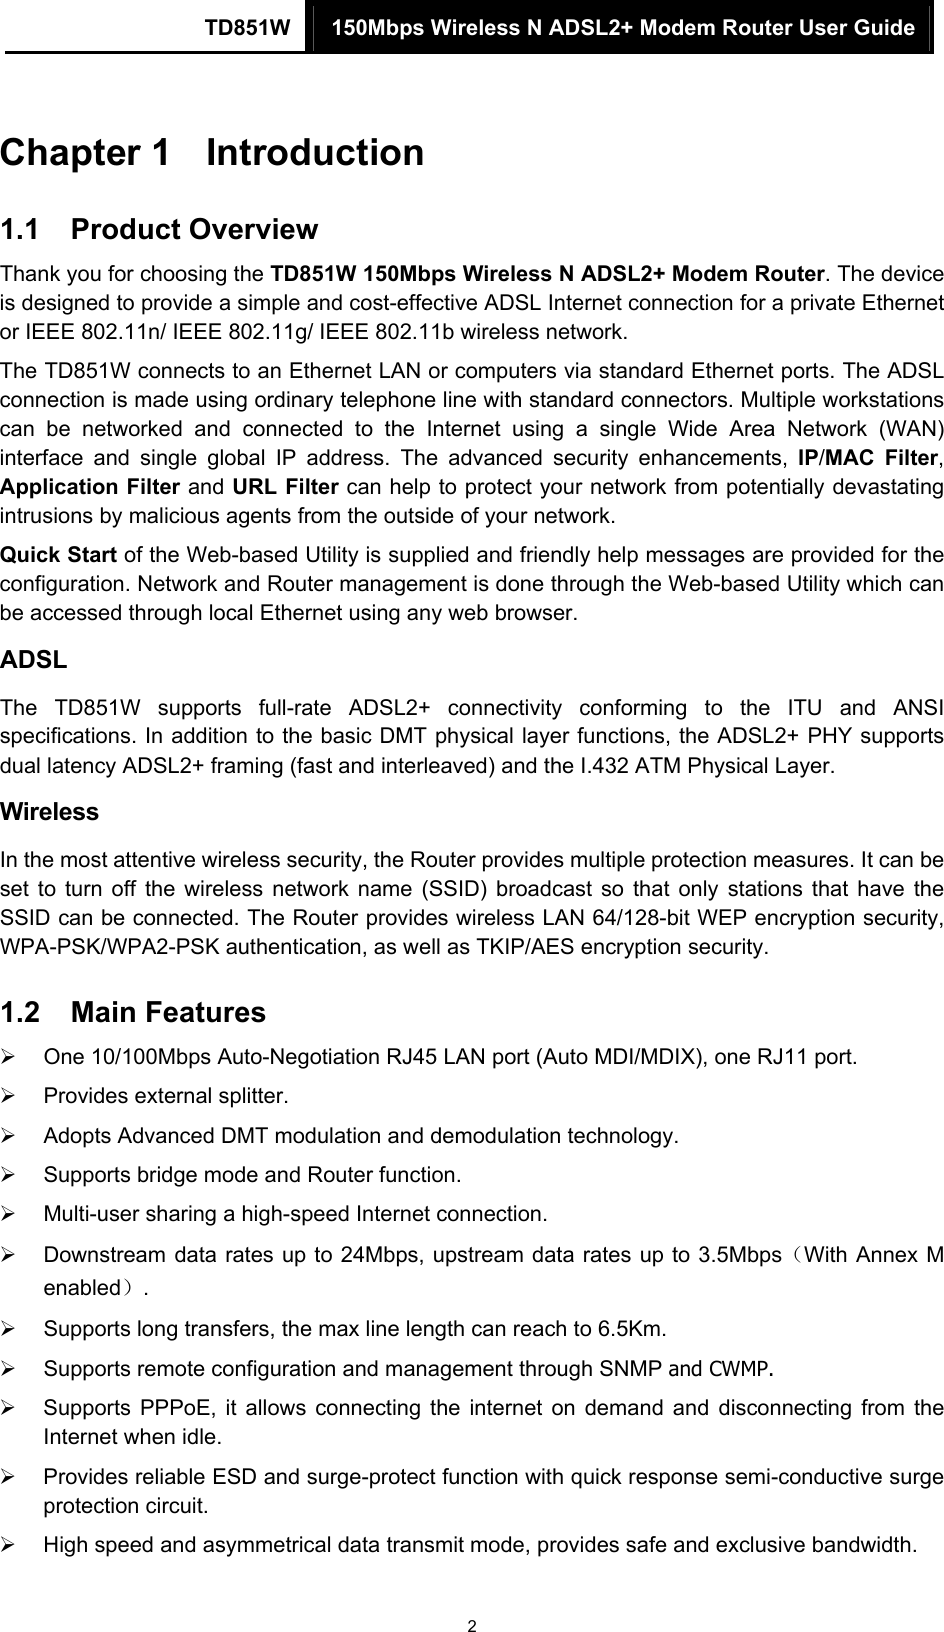 TD851W  150Mbps Wireless N ADSL2+ Modem Router User Guide 2 Chapter 1  Introduction 1.1  Product Overview Thank you for choosing the TD851W 150Mbps Wireless N ADSL2+ Modem Router. The device is designed to provide a simple and cost-effective ADSL Internet connection for a private Ethernet or IEEE 802.11n/ IEEE 802.11g/ IEEE 802.11b wireless network. The TD851W connects to an Ethernet LAN or computers via standard Ethernet ports. The ADSL connection is made using ordinary telephone line with standard connectors. Multiple workstations can be networked and connected to the Internet using a single Wide Area Network (WAN) interface and single global IP address. The advanced security enhancements, IP/MAC Filter, Application Filter and URL Filter can help to protect your network from potentially devastating intrusions by malicious agents from the outside of your network. Quick Start of the Web-based Utility is supplied and friendly help messages are provided for the configuration. Network and Router management is done through the Web-based Utility which can be accessed through local Ethernet using any web browser. ADSL The TD851W supports full-rate ADSL2+ connectivity conforming to the ITU and ANSI specifications. In addition to the basic DMT physical layer functions, the ADSL2+ PHY supports dual latency ADSL2+ framing (fast and interleaved) and the I.432 ATM Physical Layer. Wireless In the most attentive wireless security, the Router provides multiple protection measures. It can be set to turn off the wireless network name (SSID) broadcast so that only stations that have the SSID can be connected. The Router provides wireless LAN 64/128-bit WEP encryption security, WPA-PSK/WPA2-PSK authentication, as well as TKIP/AES encryption security. 1.2  Main Features ¾  One 10/100Mbps Auto-Negotiation RJ45 LAN port (Auto MDI/MDIX), one RJ11 port. ¾  Provides external splitter. ¾  Adopts Advanced DMT modulation and demodulation technology. ¾  Supports bridge mode and Router function. ¾  Multi-user sharing a high-speed Internet connection. ¾  Downstream data rates up to 24Mbps, upstream data rates up to 3.5Mbps（With Annex M enabled）. ¾  Supports long transfers, the max line length can reach to 6.5Km. ¾  Supports remote configuration and management through SNMP and CWMP. ¾  Supports PPPoE, it allows connecting the internet on demand and disconnecting from the Internet when idle. ¾  Provides reliable ESD and surge-protect function with quick response semi-conductive surge protection circuit. ¾  High speed and asymmetrical data transmit mode, provides safe and exclusive bandwidth. 